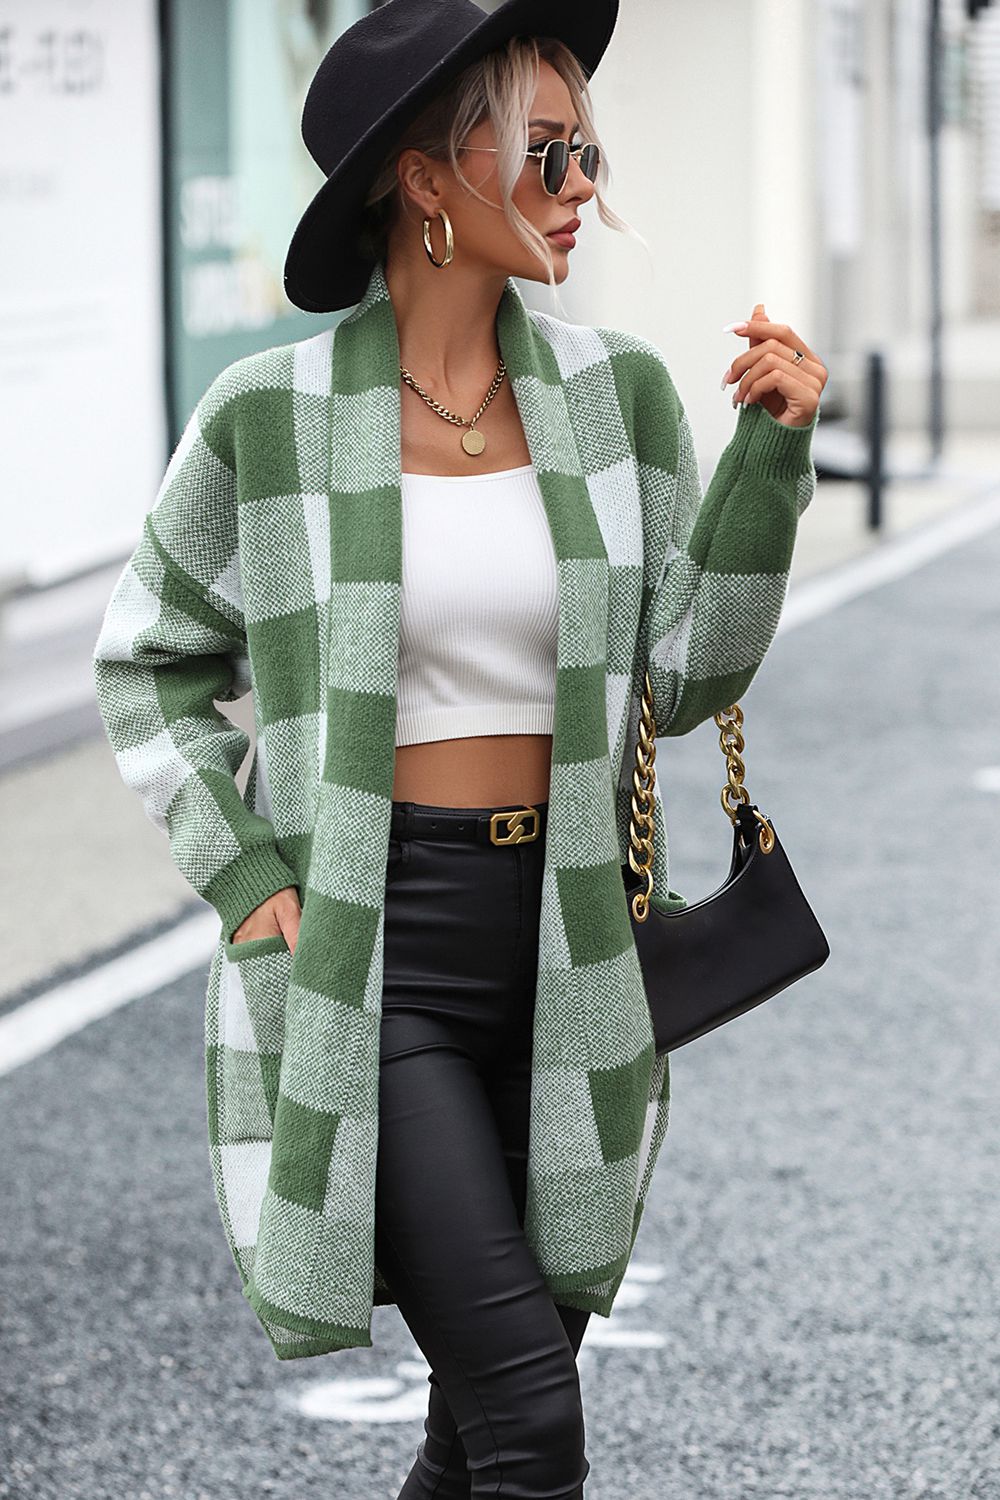 Gray Plaid Dropped Shoulder Cardigan with Pocket